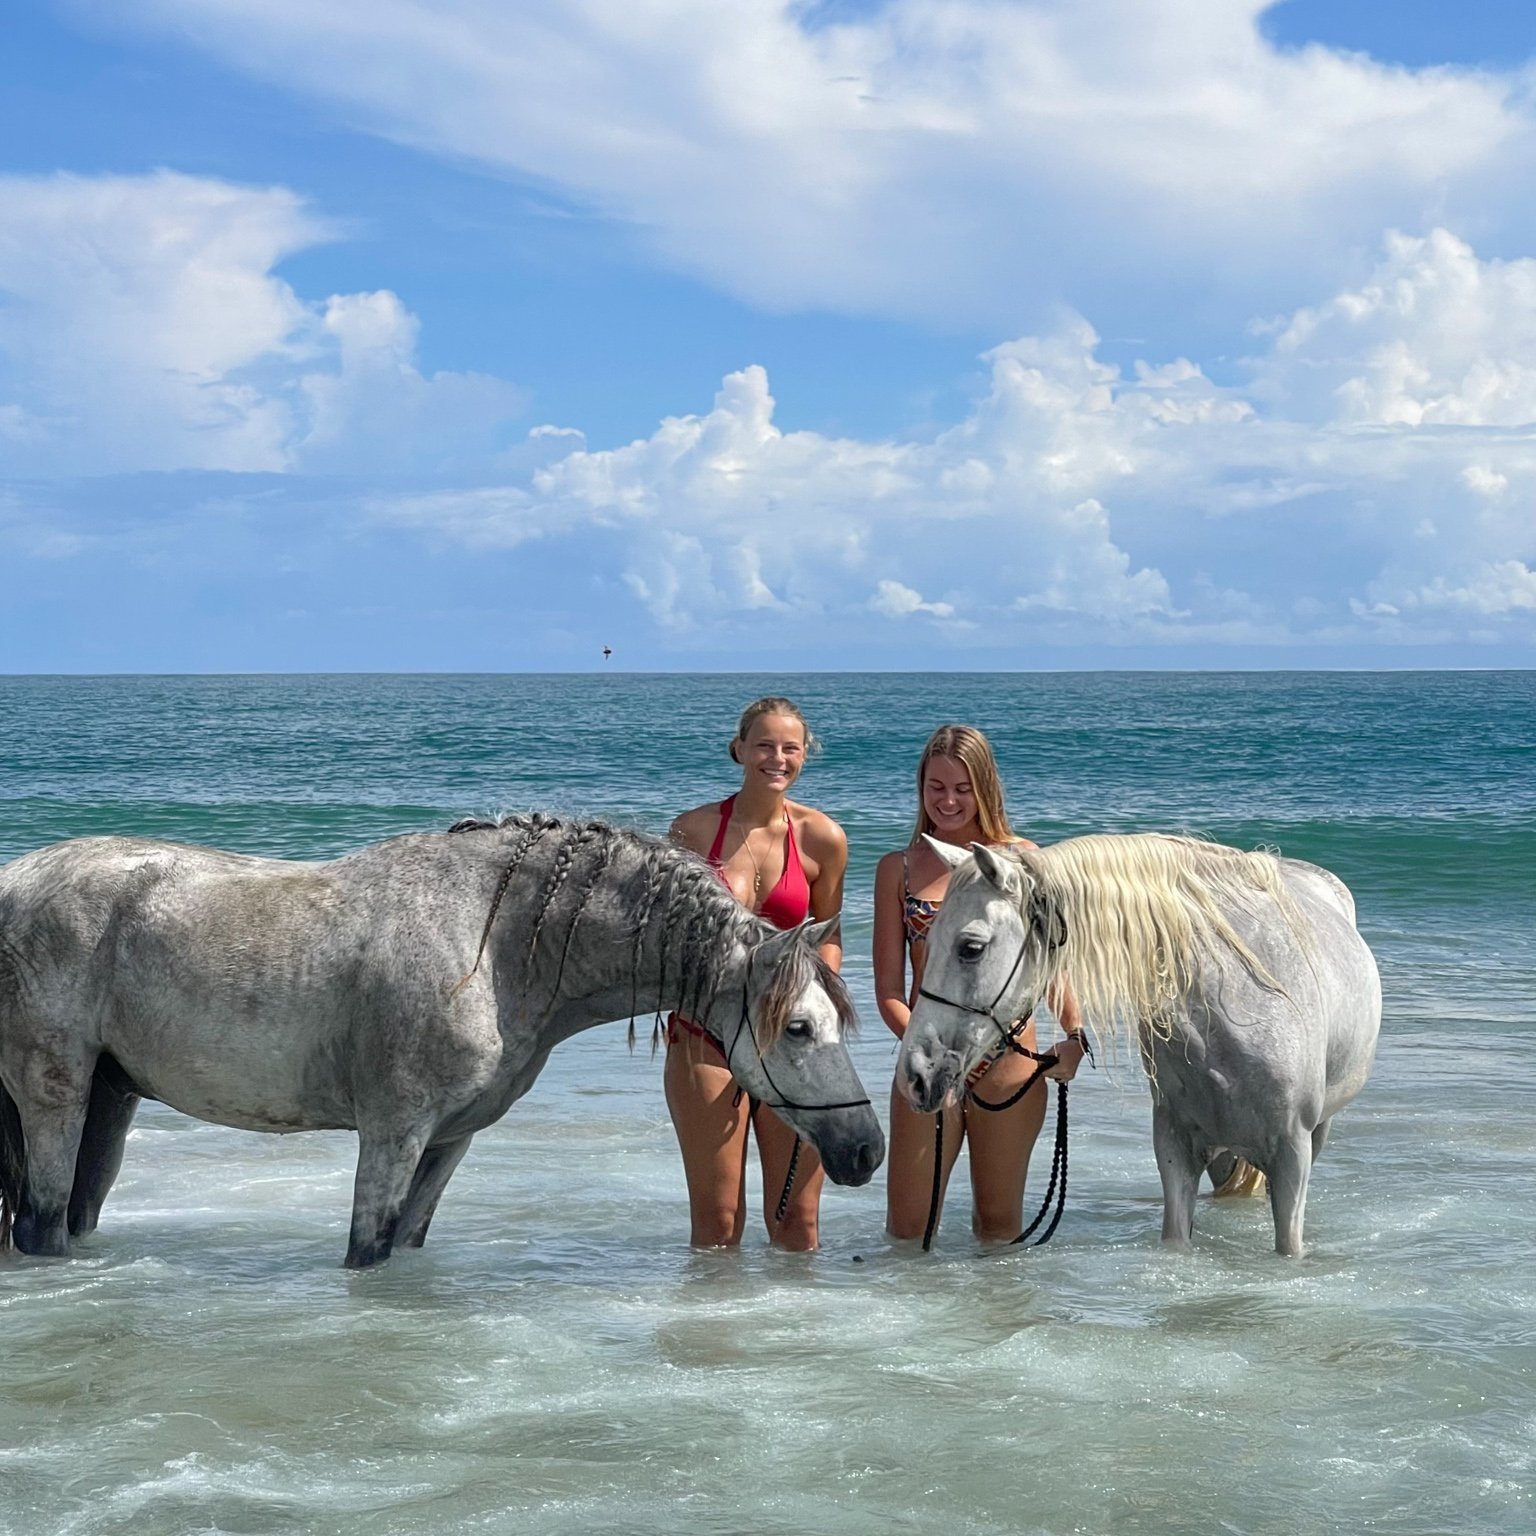 Swimming with The Horses